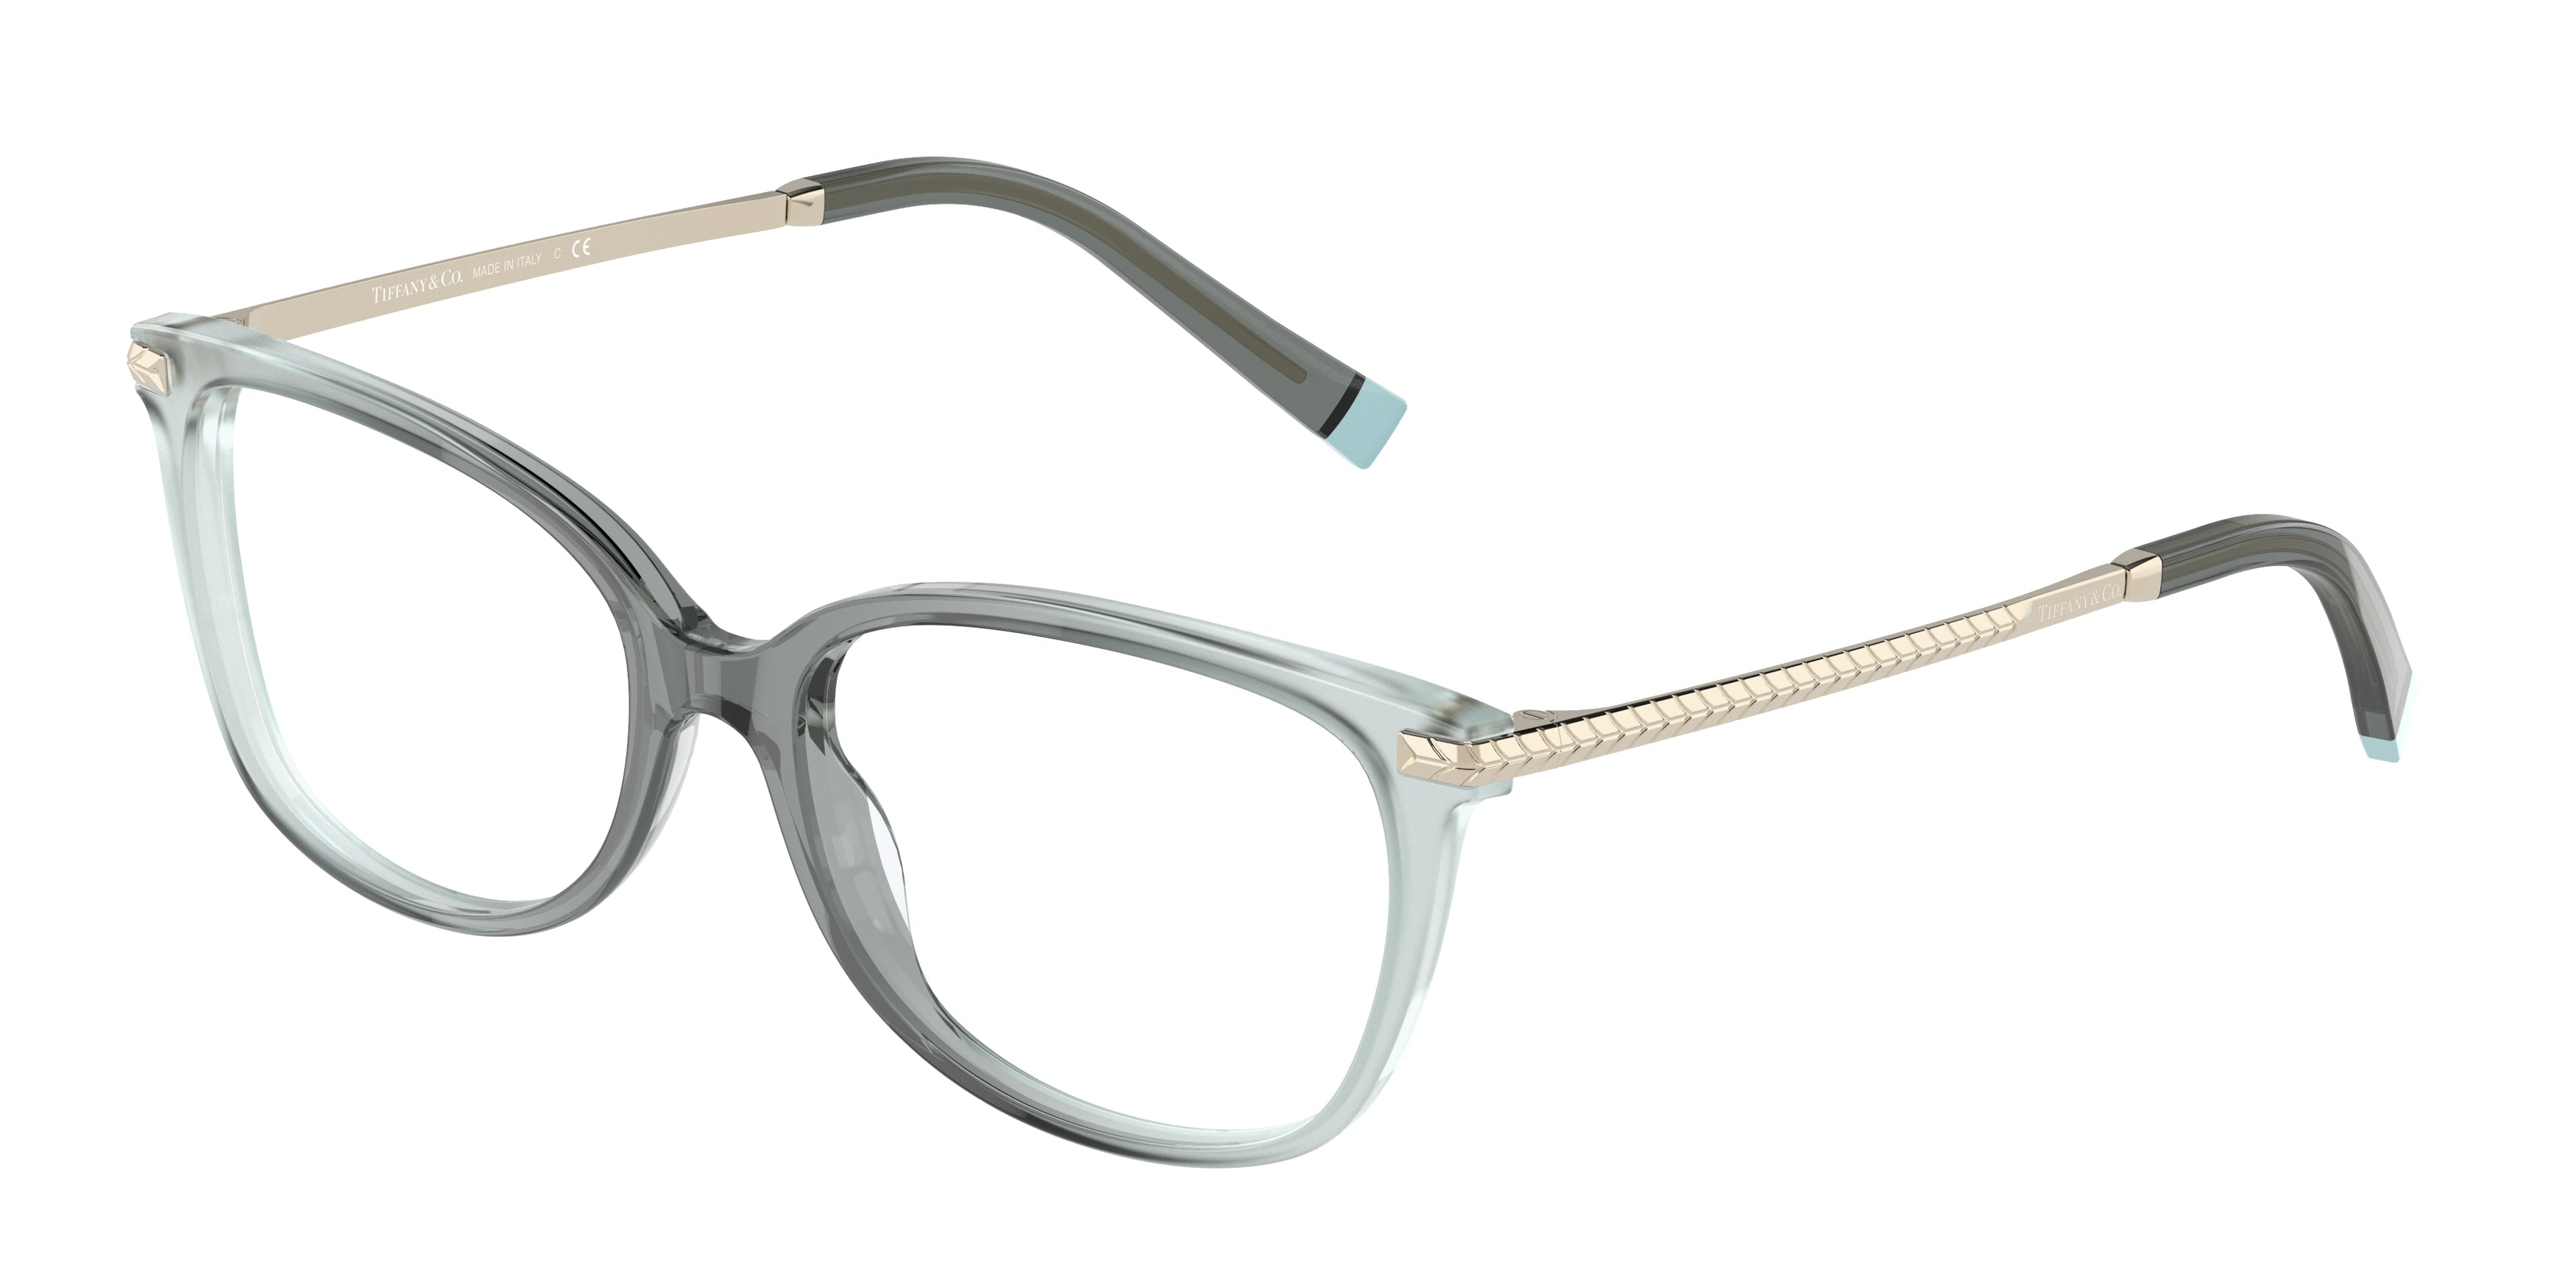 Tiffany TF2221 Rectangle Eyeglasses  8346-Green Gradient Milky Green 54-140-16 - Color Map Green